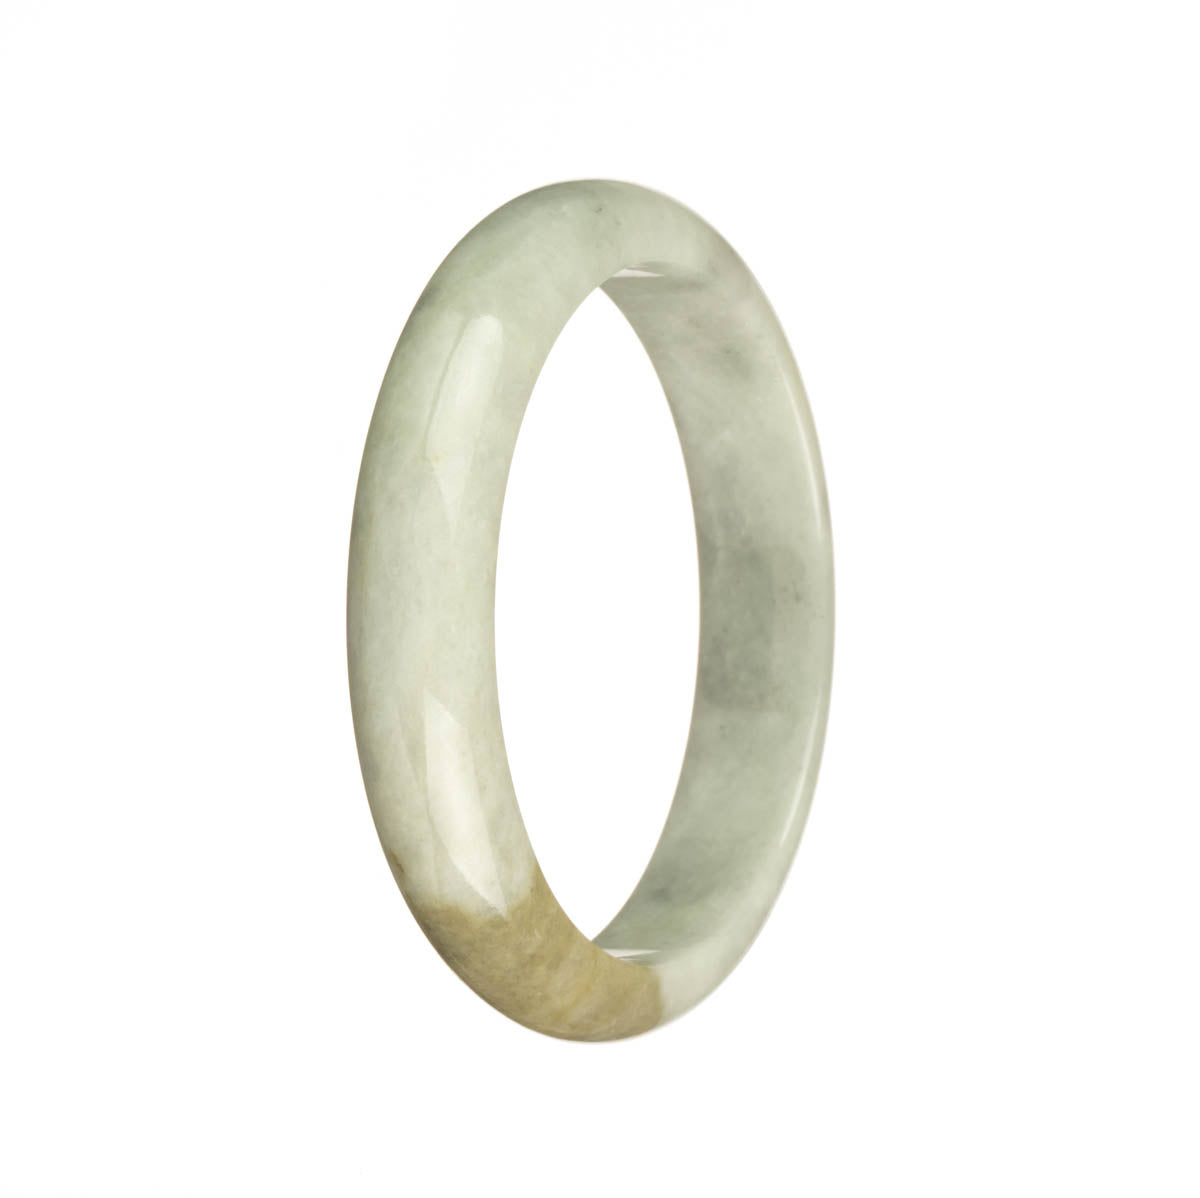 Genuine Type A Pale Green and Brown with Grey Pattern Jade Bracelet - 56mm Half Moon